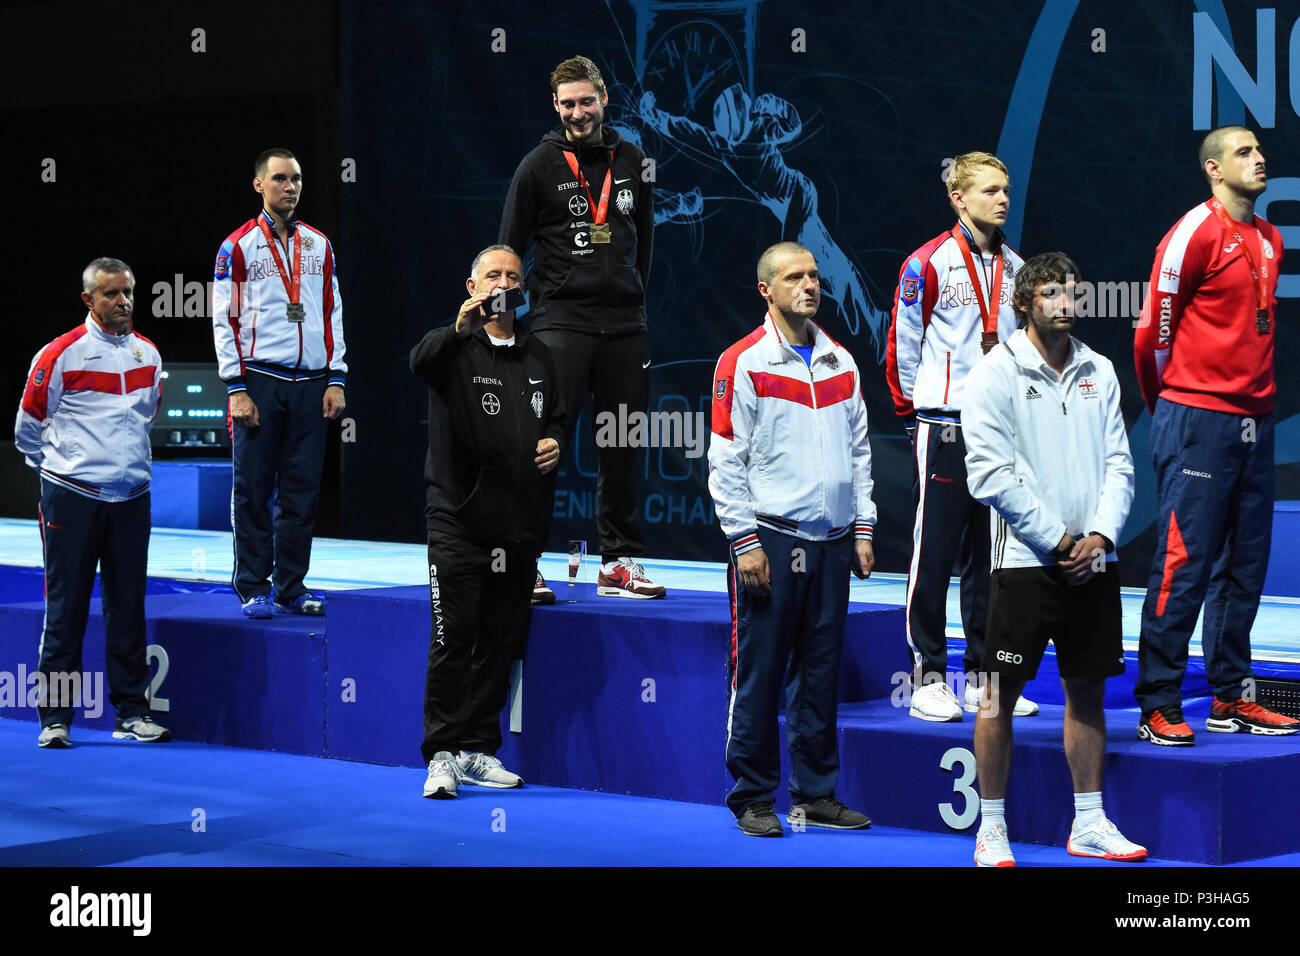 Novi Sad,Serbia. 18th June, 2018.  European fencing championship for mens saber awarding medals Hartung Max from Germany won the first place,second place won Ibragimov Kamil from Russia,third places wons  Bazadze Sandro from Georgia and Danilenko Dmitriy from Russia  photo Nenad Mihajlovic Stock Photo